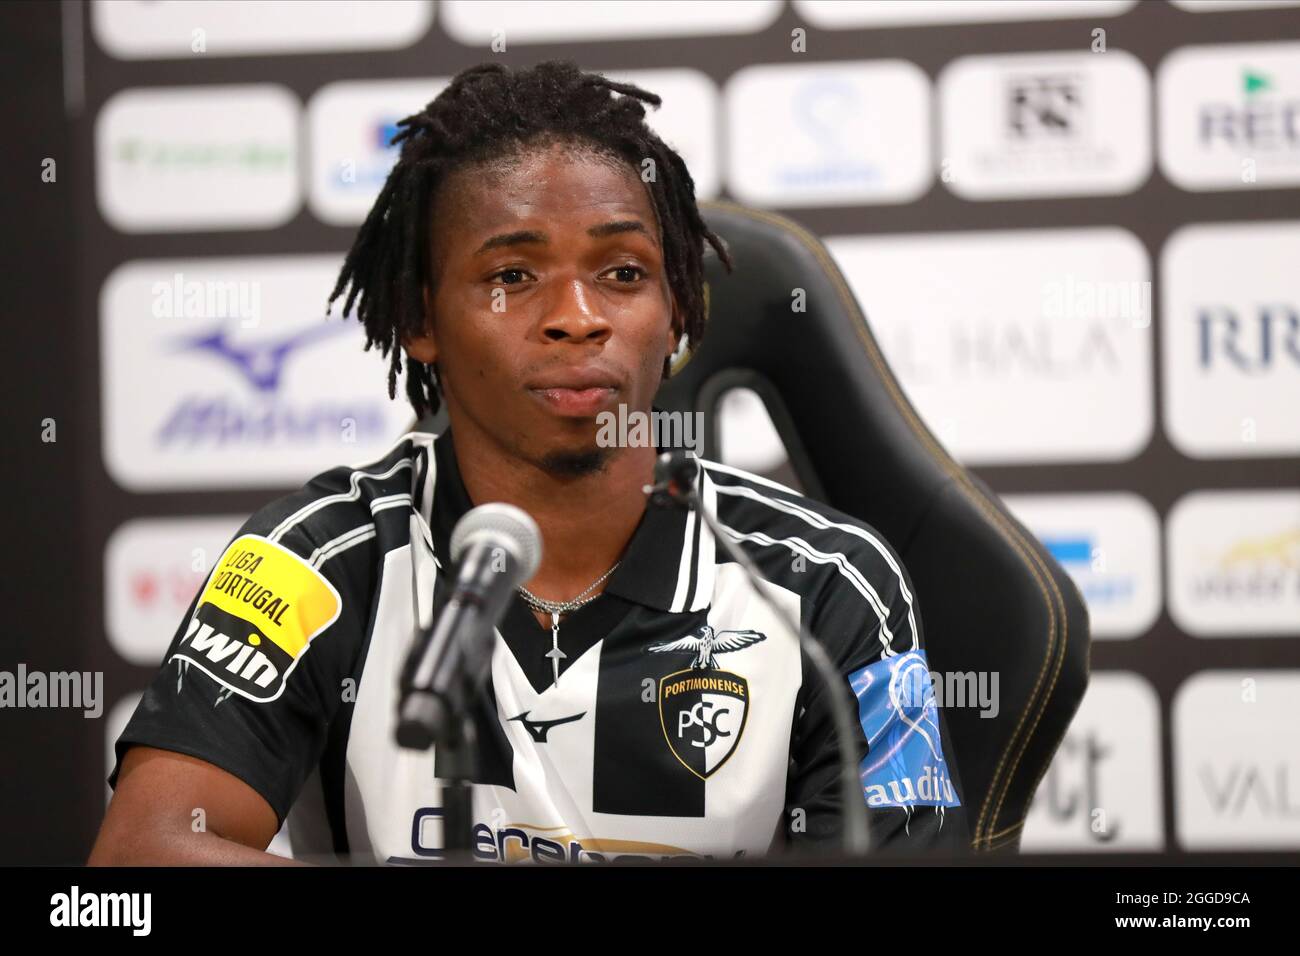 Portimão, 08/30/2021 - Portimão, this afternoon, presented the player  Abraham Ayomide Marcus, reinforcement for the 2021/22 season, at Portimão  EstÃdio. Abraham Ayomide Marcus; (Carlos Vidigal / Global Images/Sipa USA  Stock Photo - Alamy